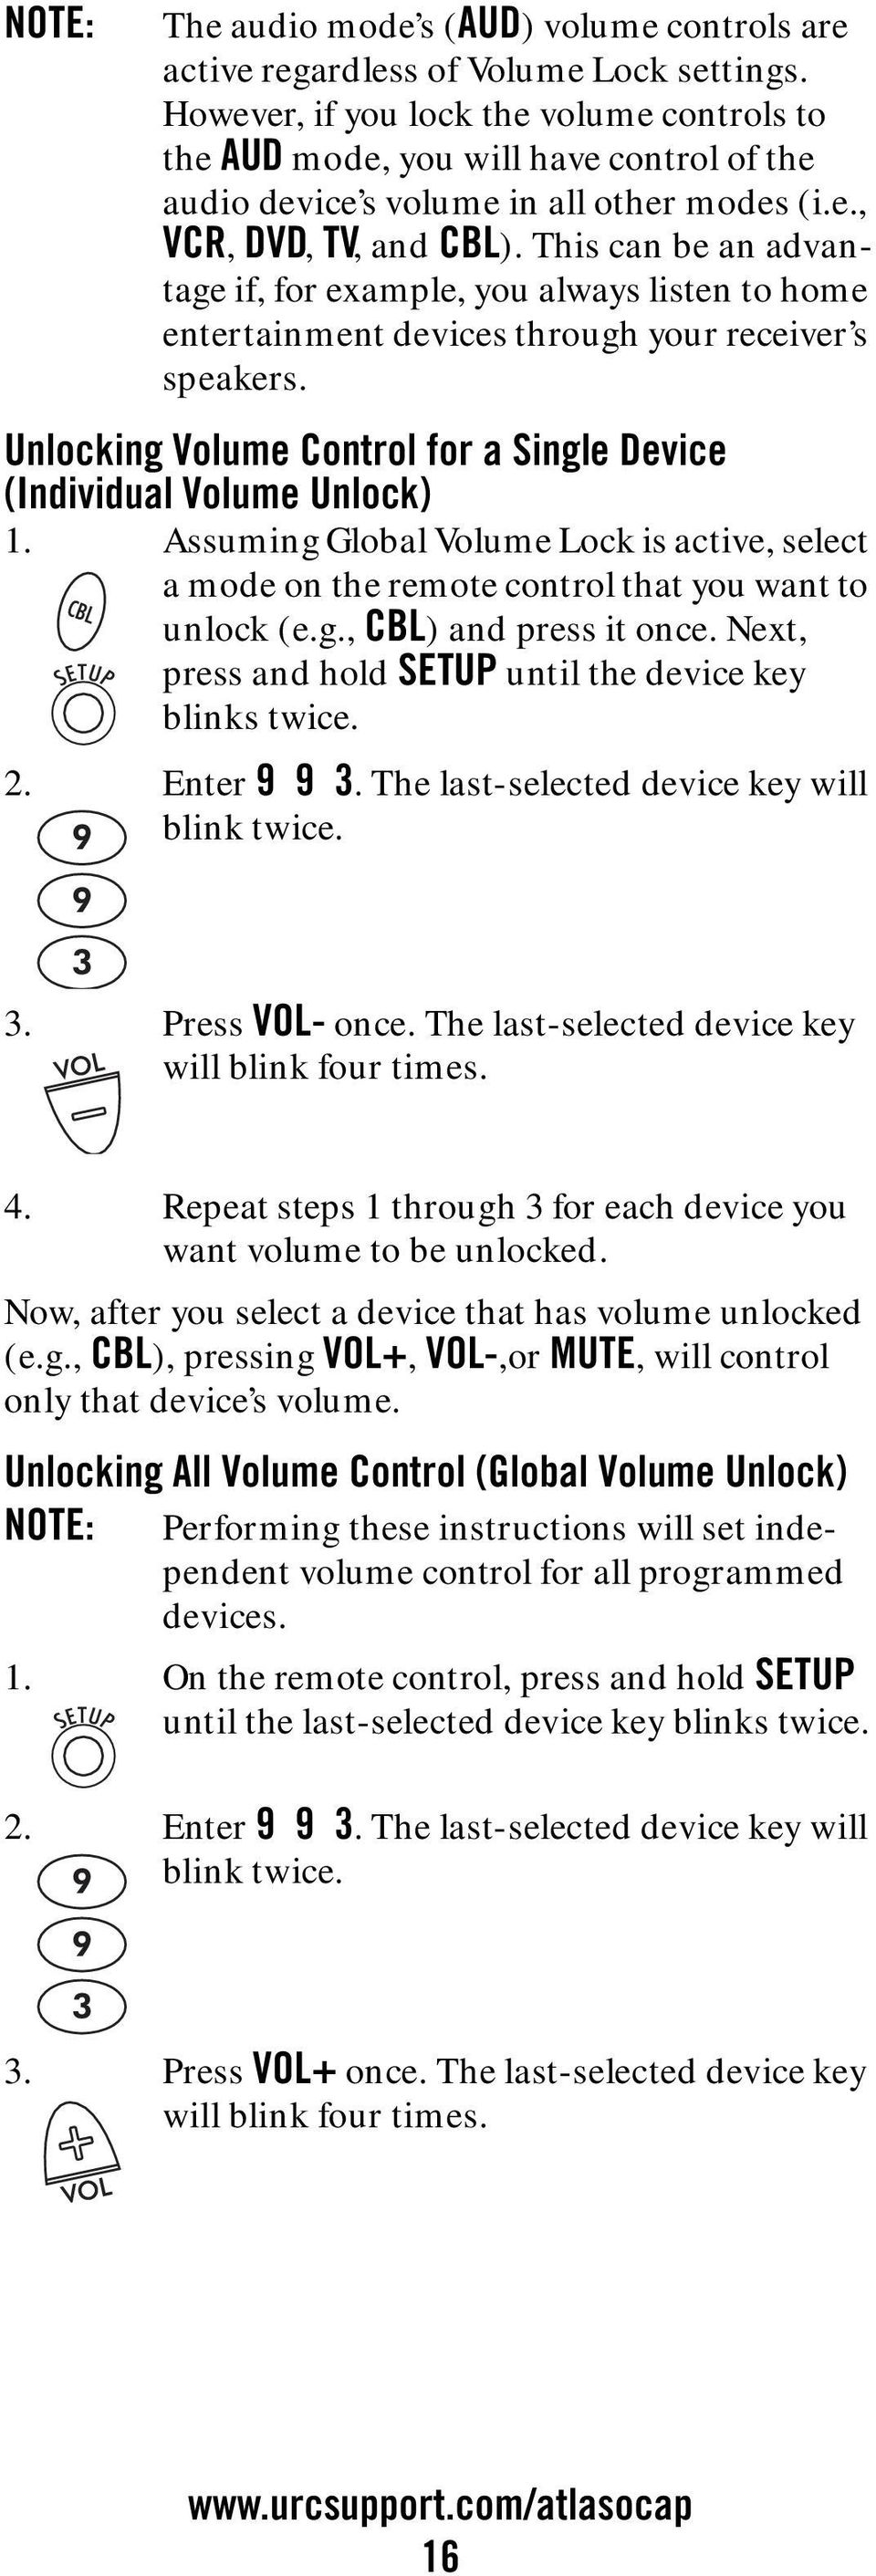 This can be an advantage if, for example, you always listen to home entertainment devices through your receiver s speakers. Unlocking Volume Control for a Single Device (Individual Volume Unlock) 1.